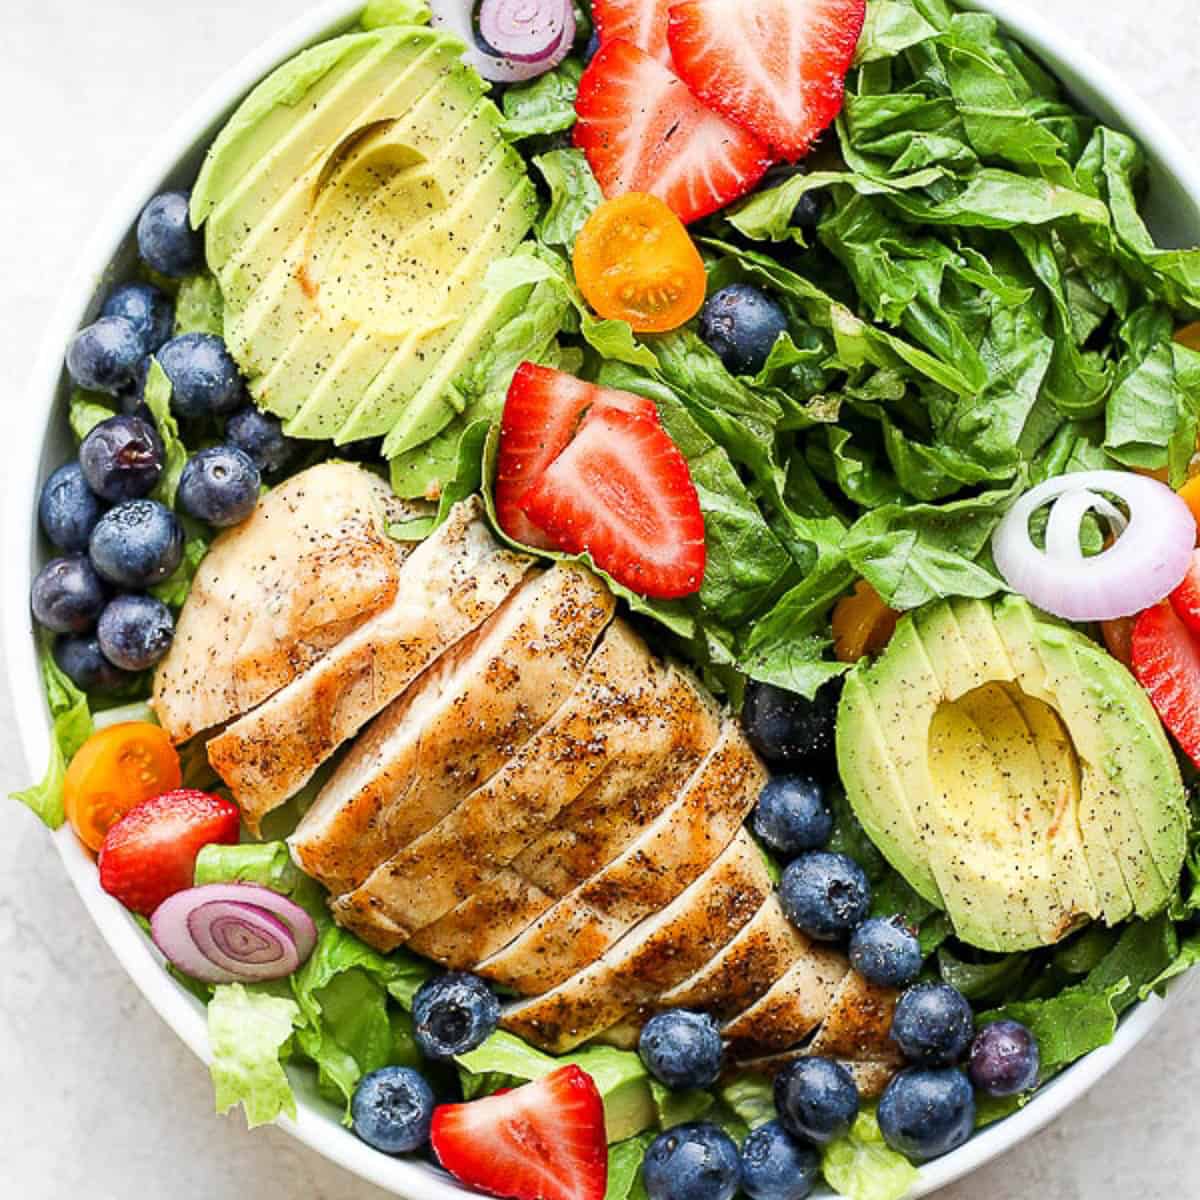 Recipe for an easy grilled chicken salad.